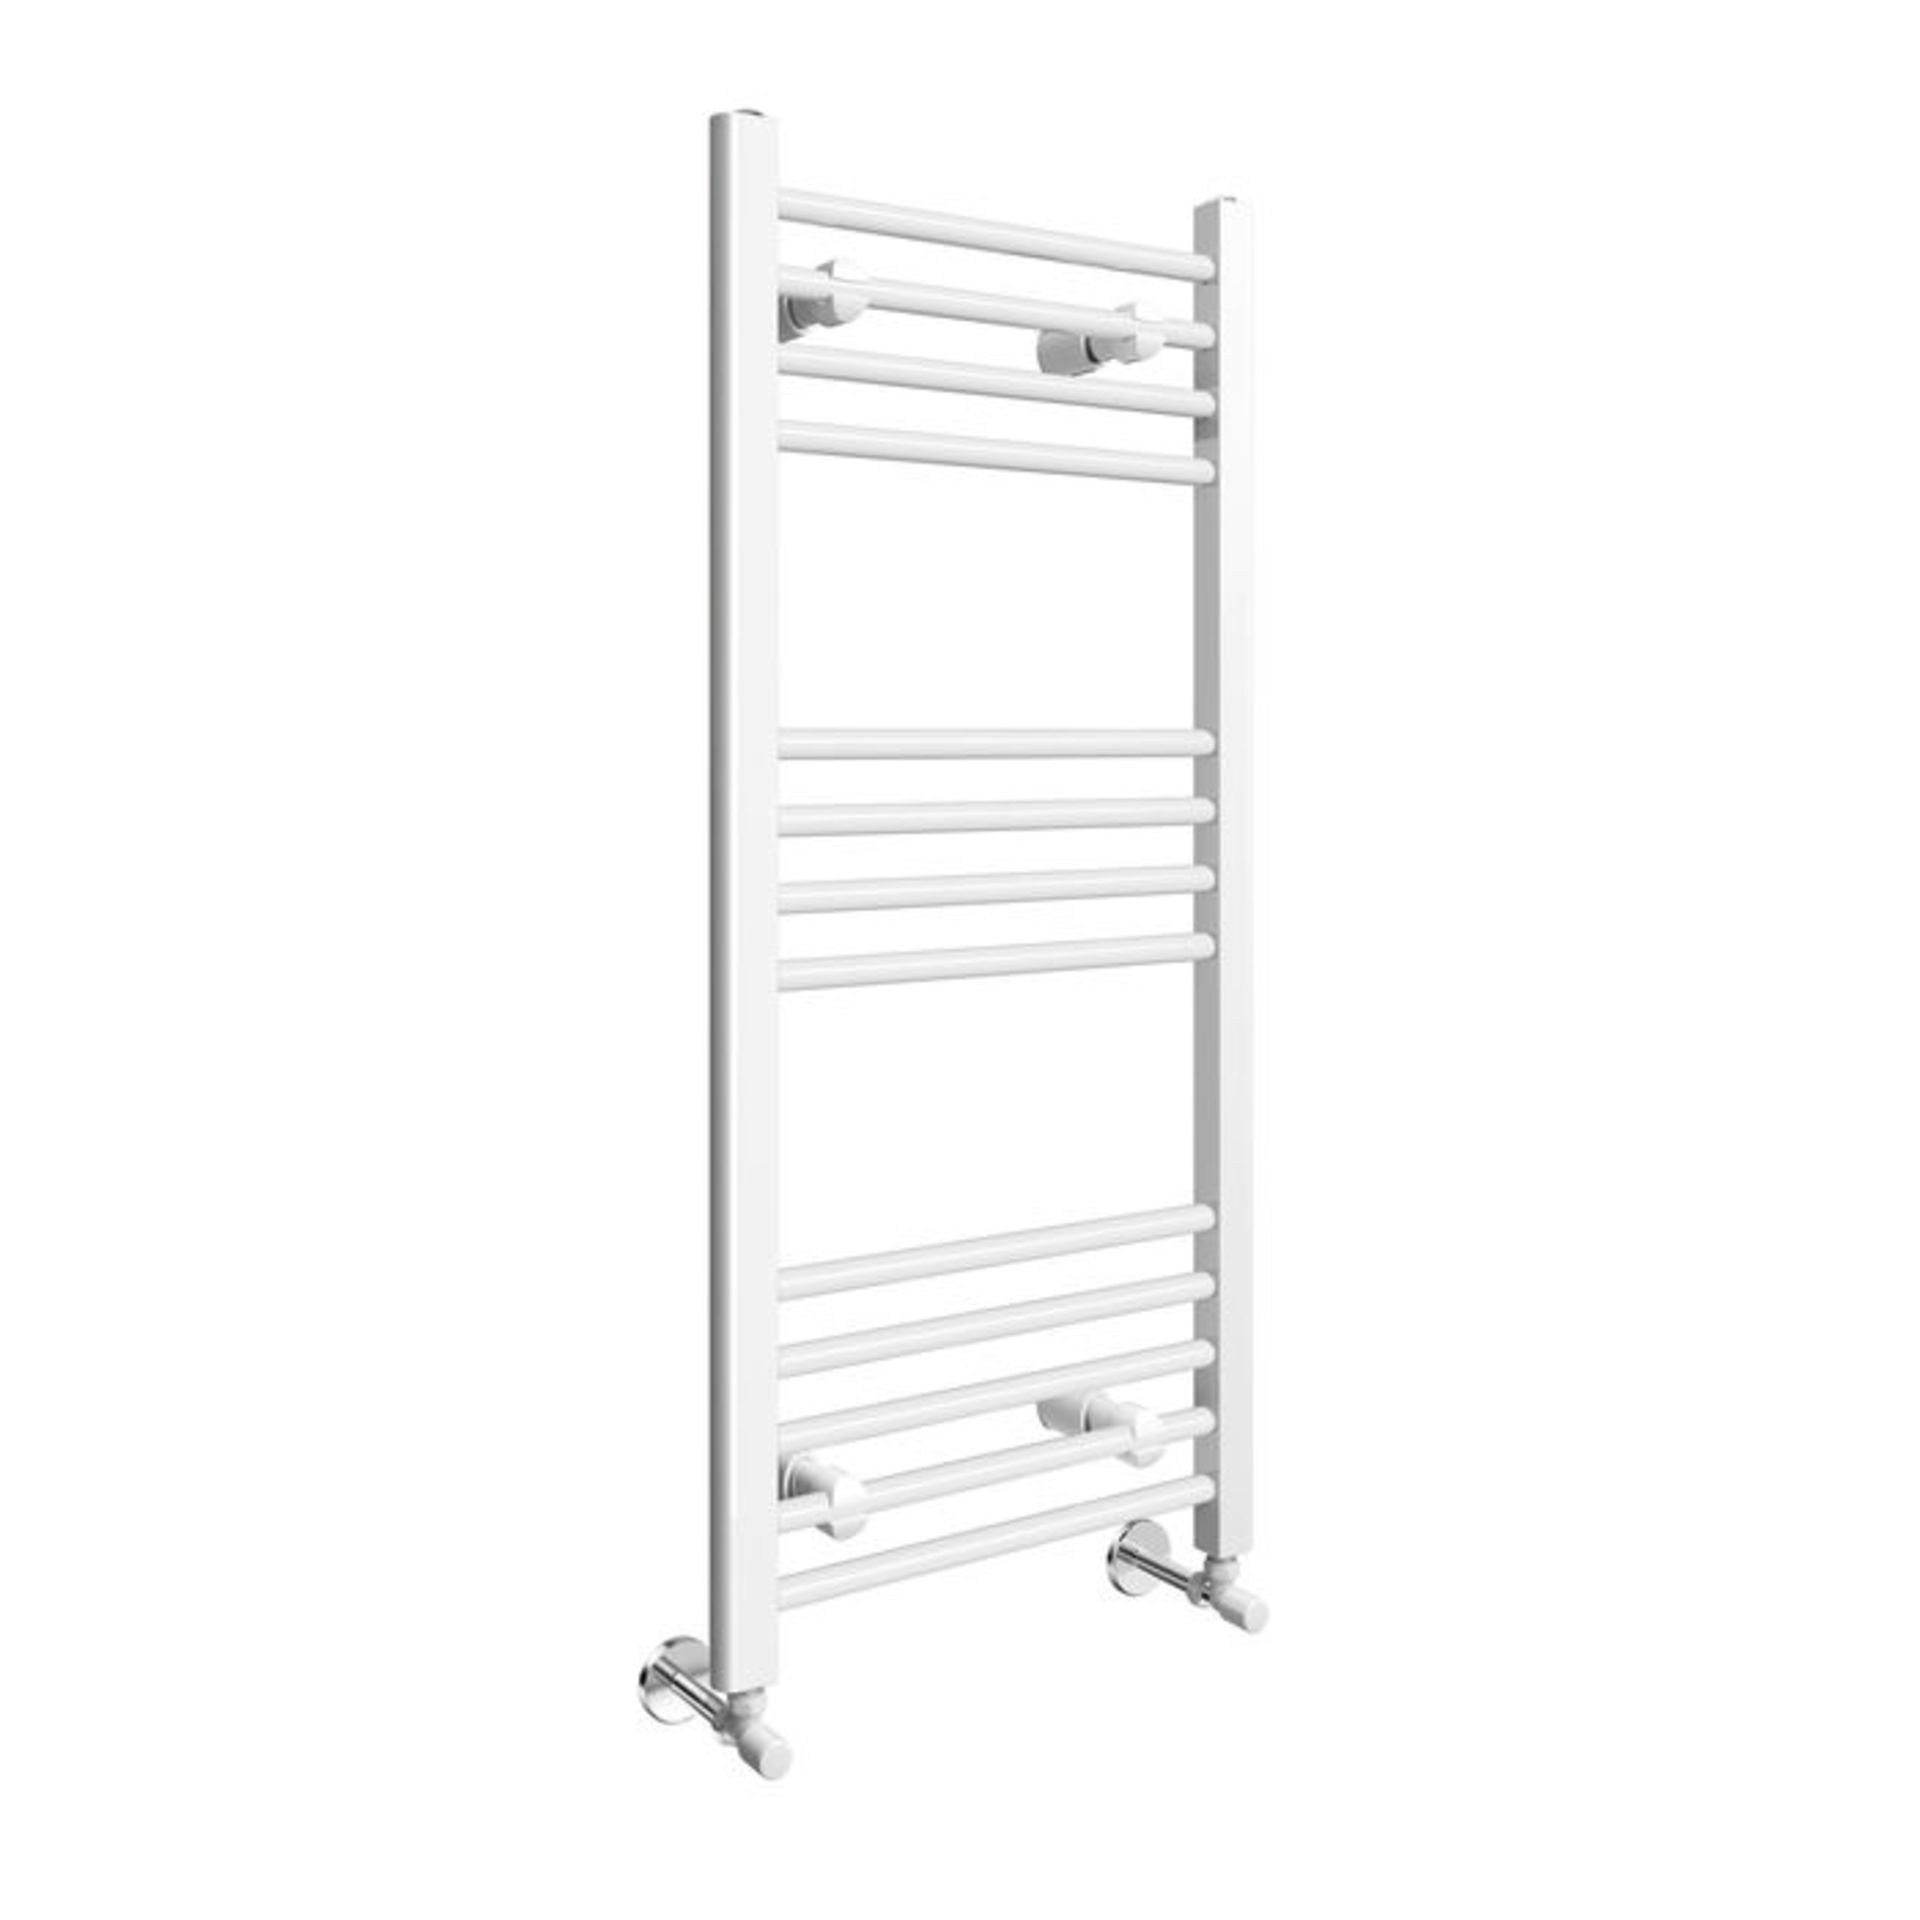 (ZL235) 1000x600mm White Straight Rail Ladder Towel Radiator. Made from low carbon steel Finished - Image 3 of 3